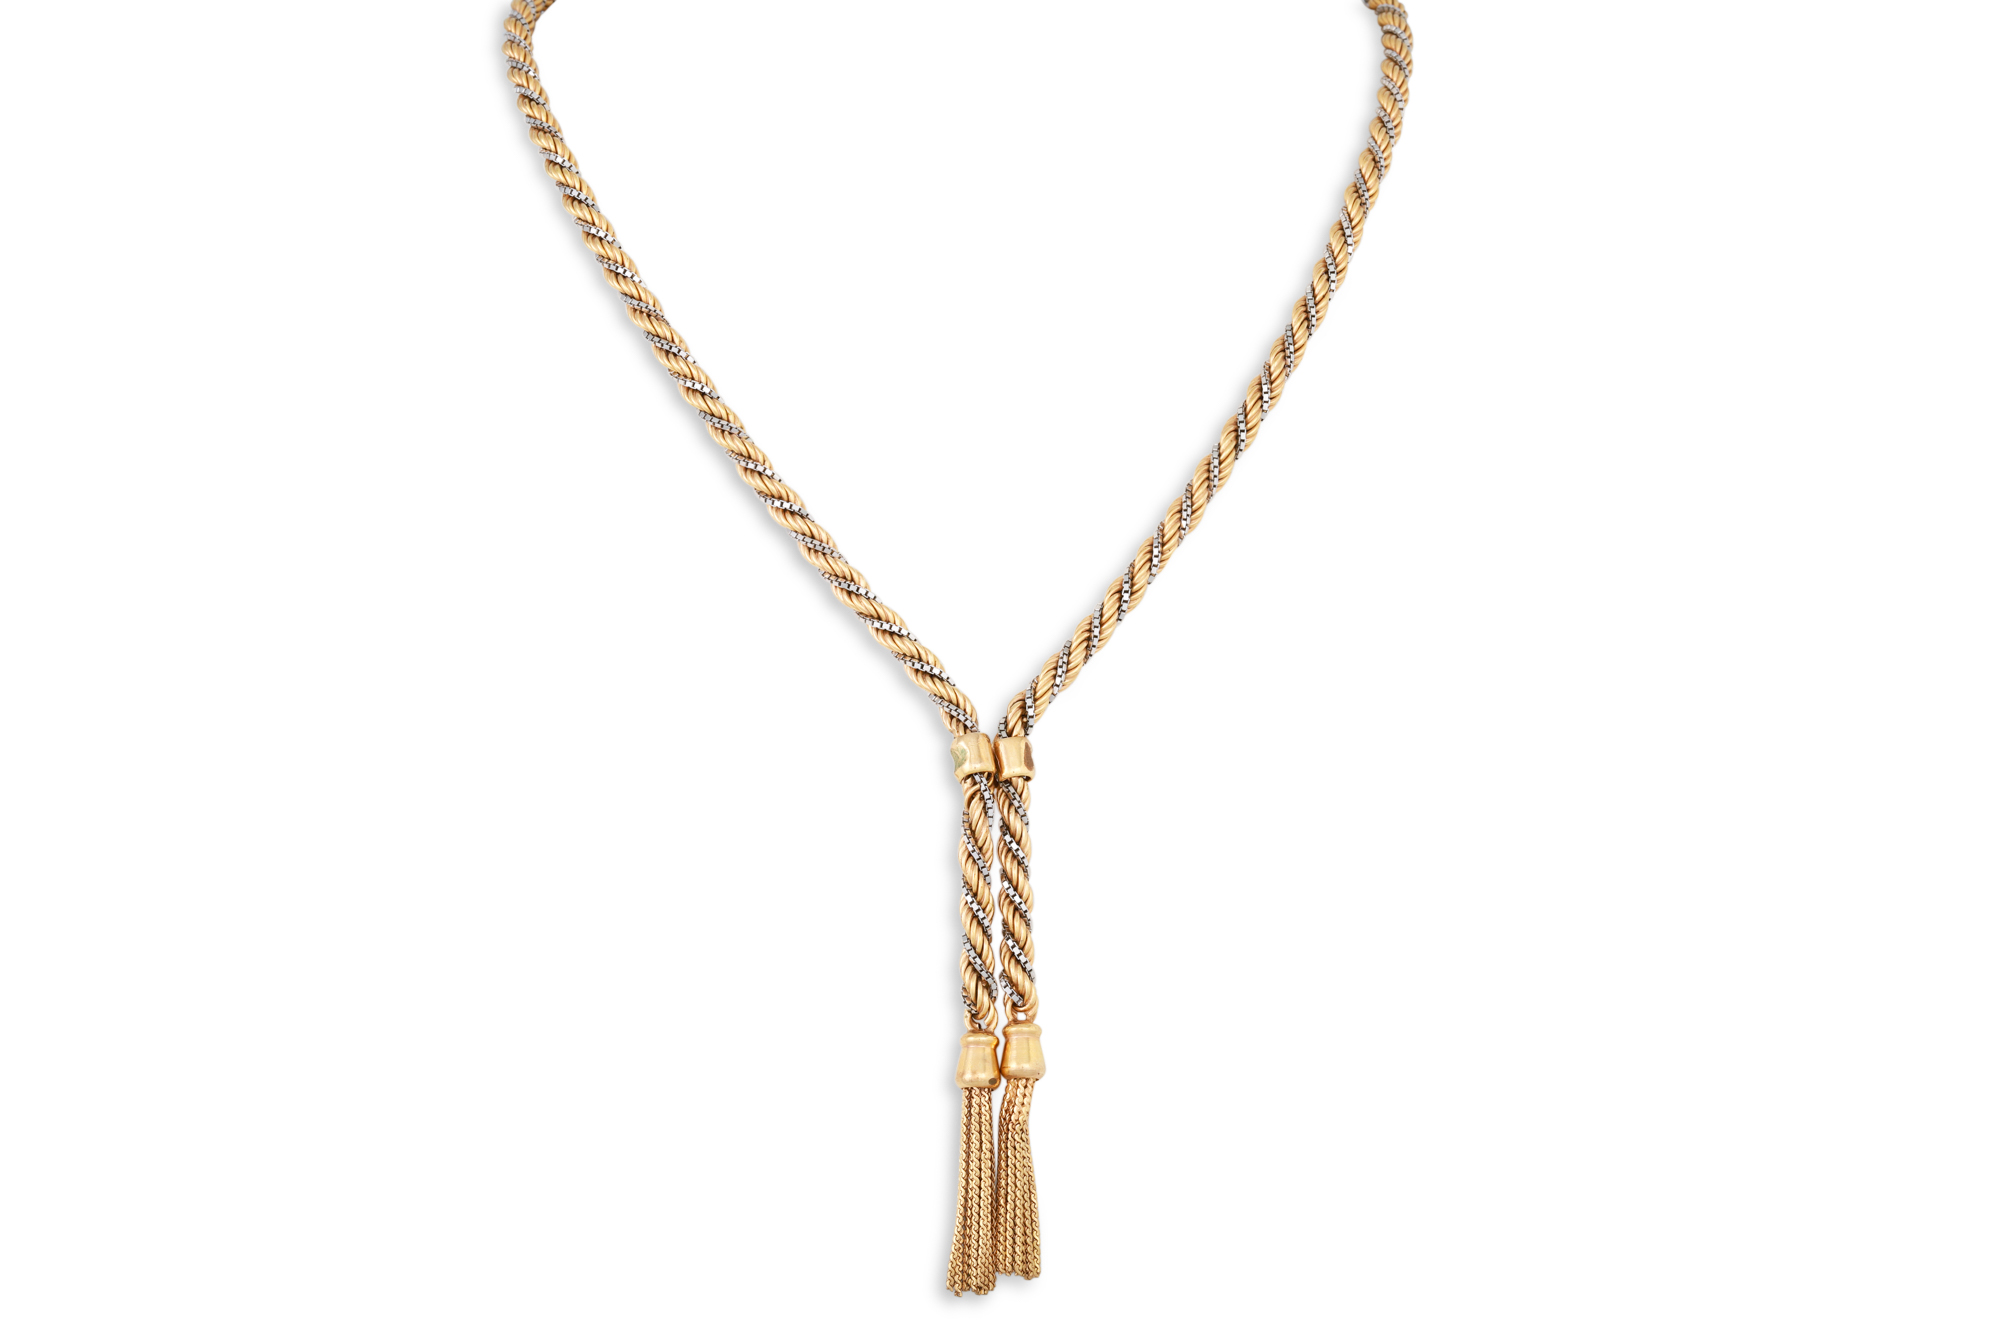 A 9CT GOLD TWO COLOUR ROPE NECKLACE, terminating in tassles, 22.6 g.